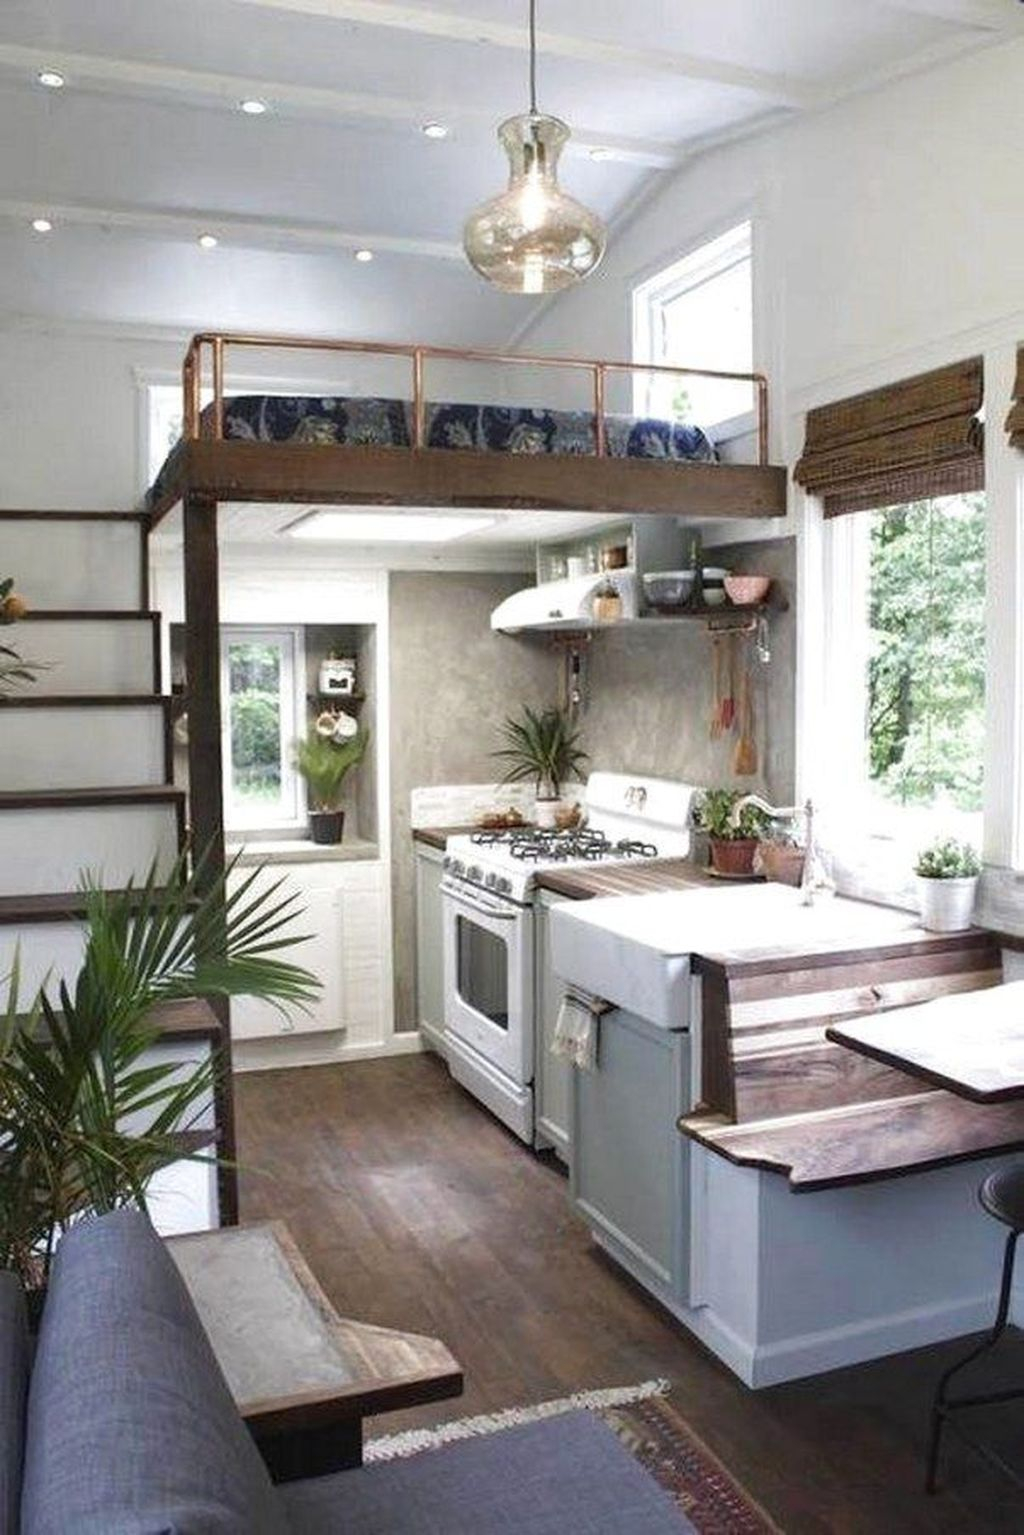 Cute Tiny Home Designs You Must See To Believe28